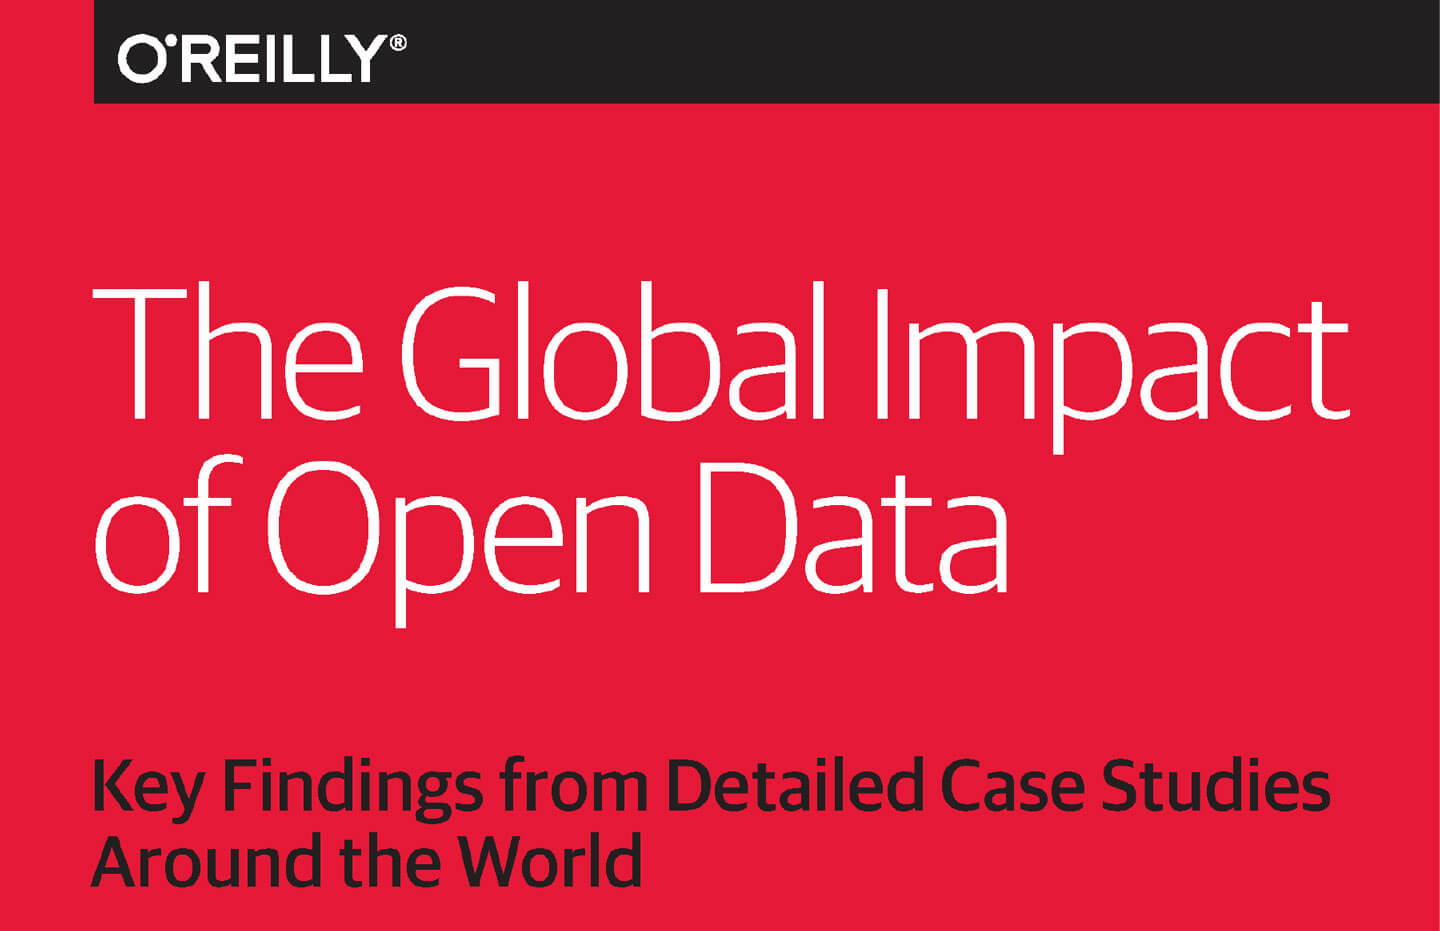 THE GLOBAL IMPACT OF OPEN DATA